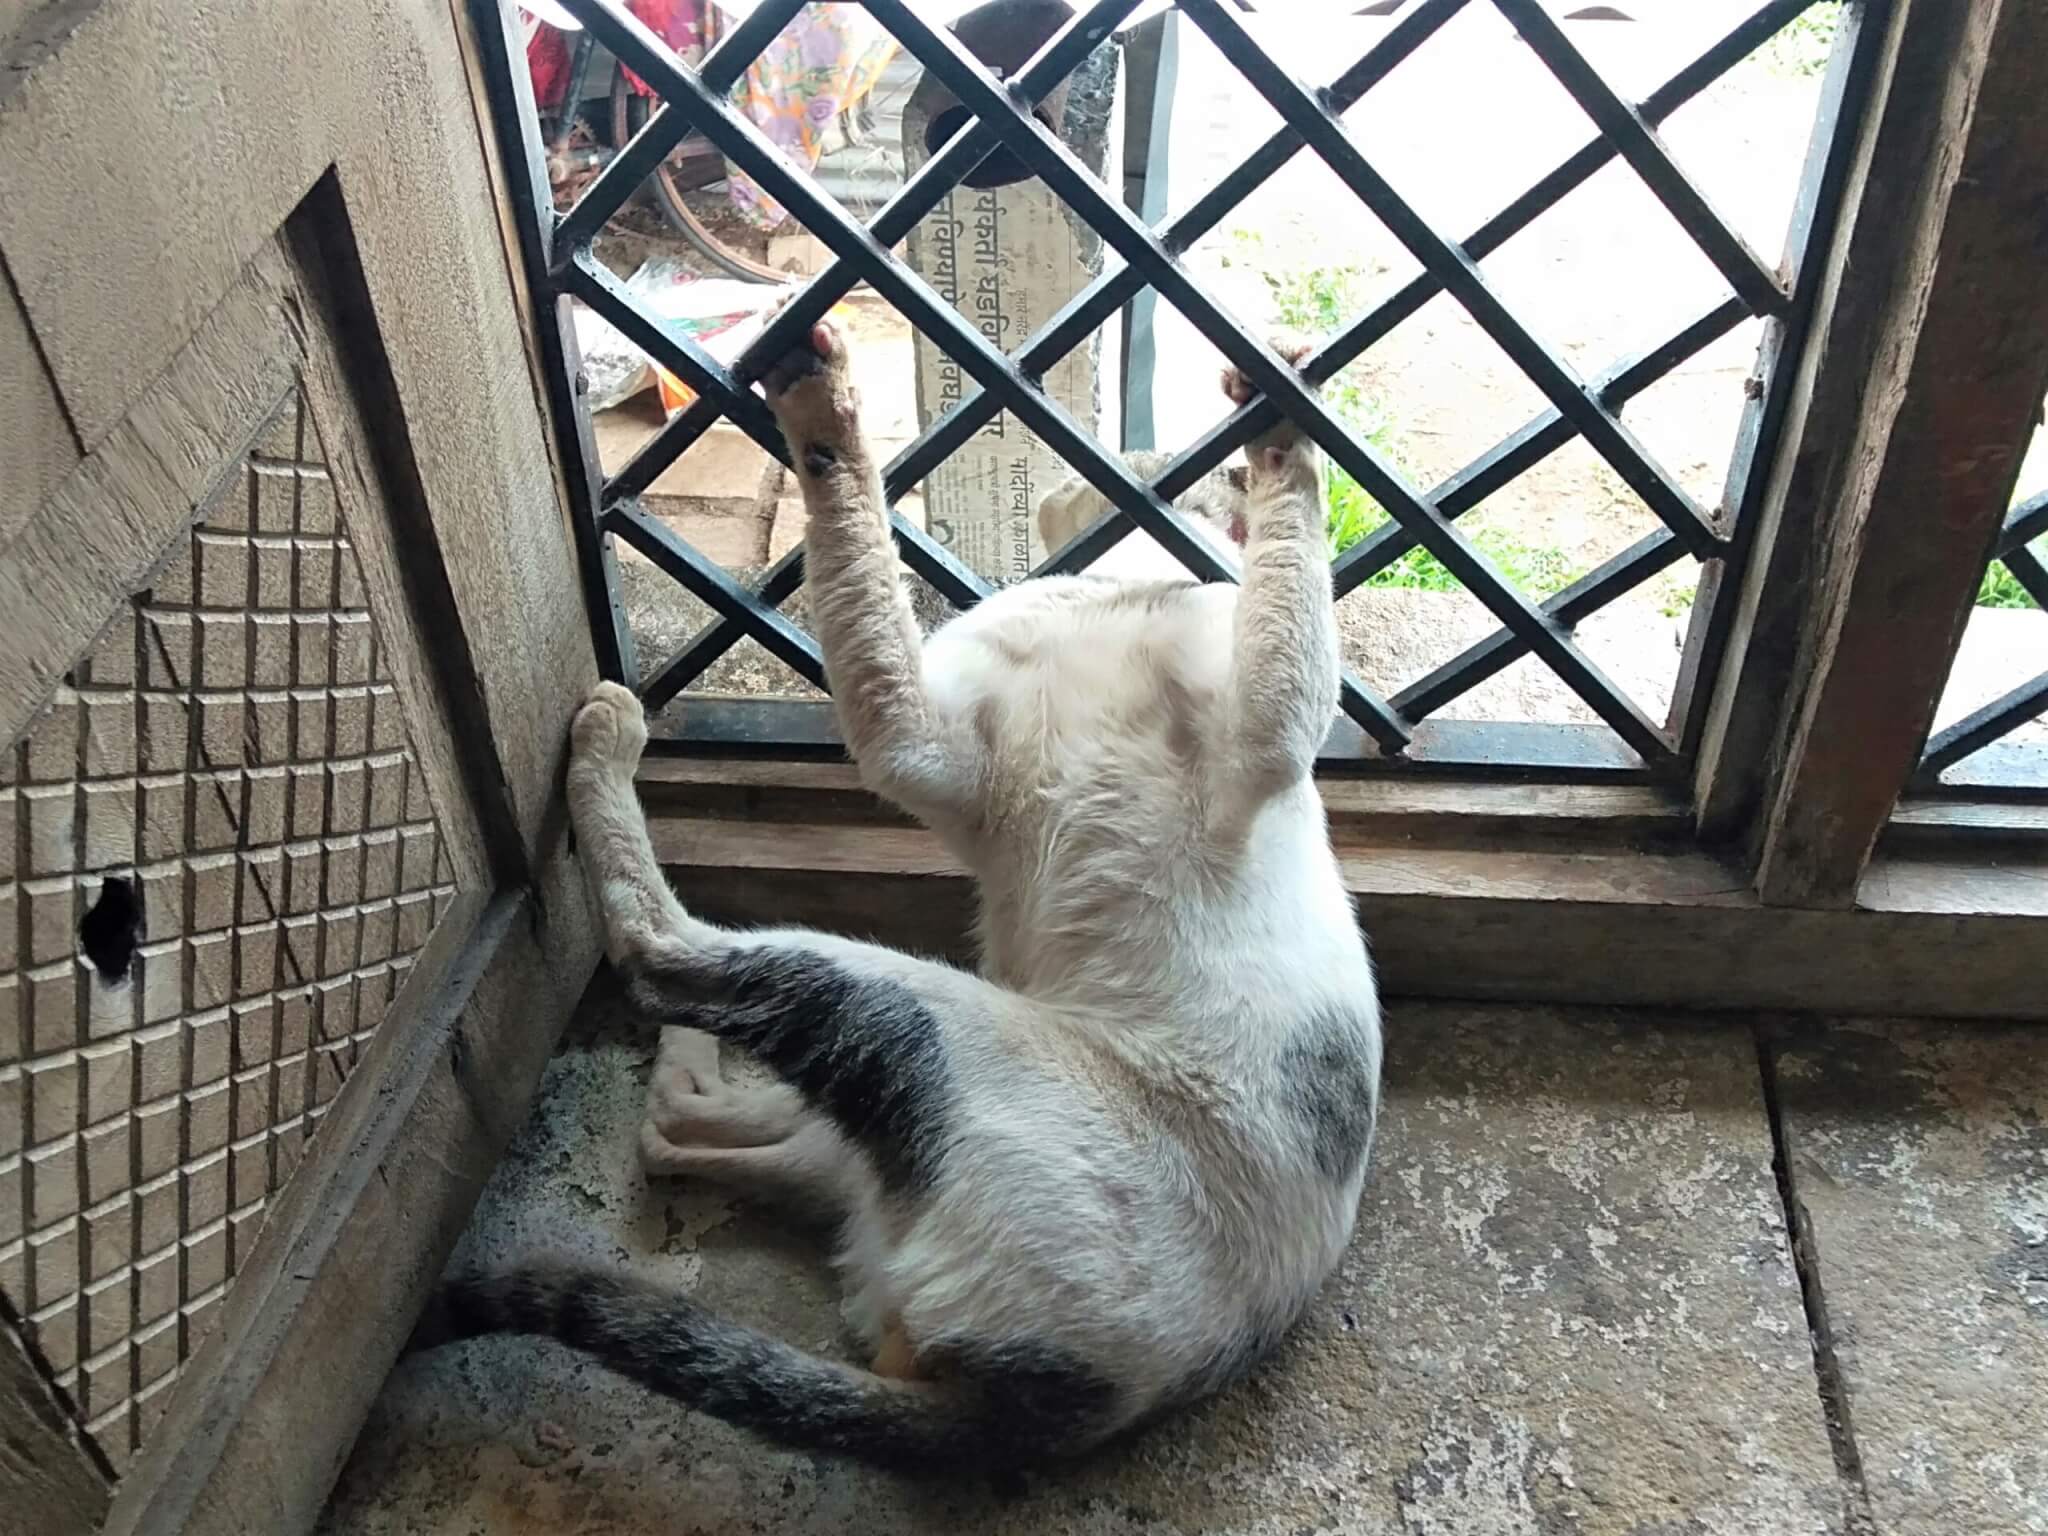 Gatik spent seven hours twisting and turning, struggling to free his head from this metal window grate.